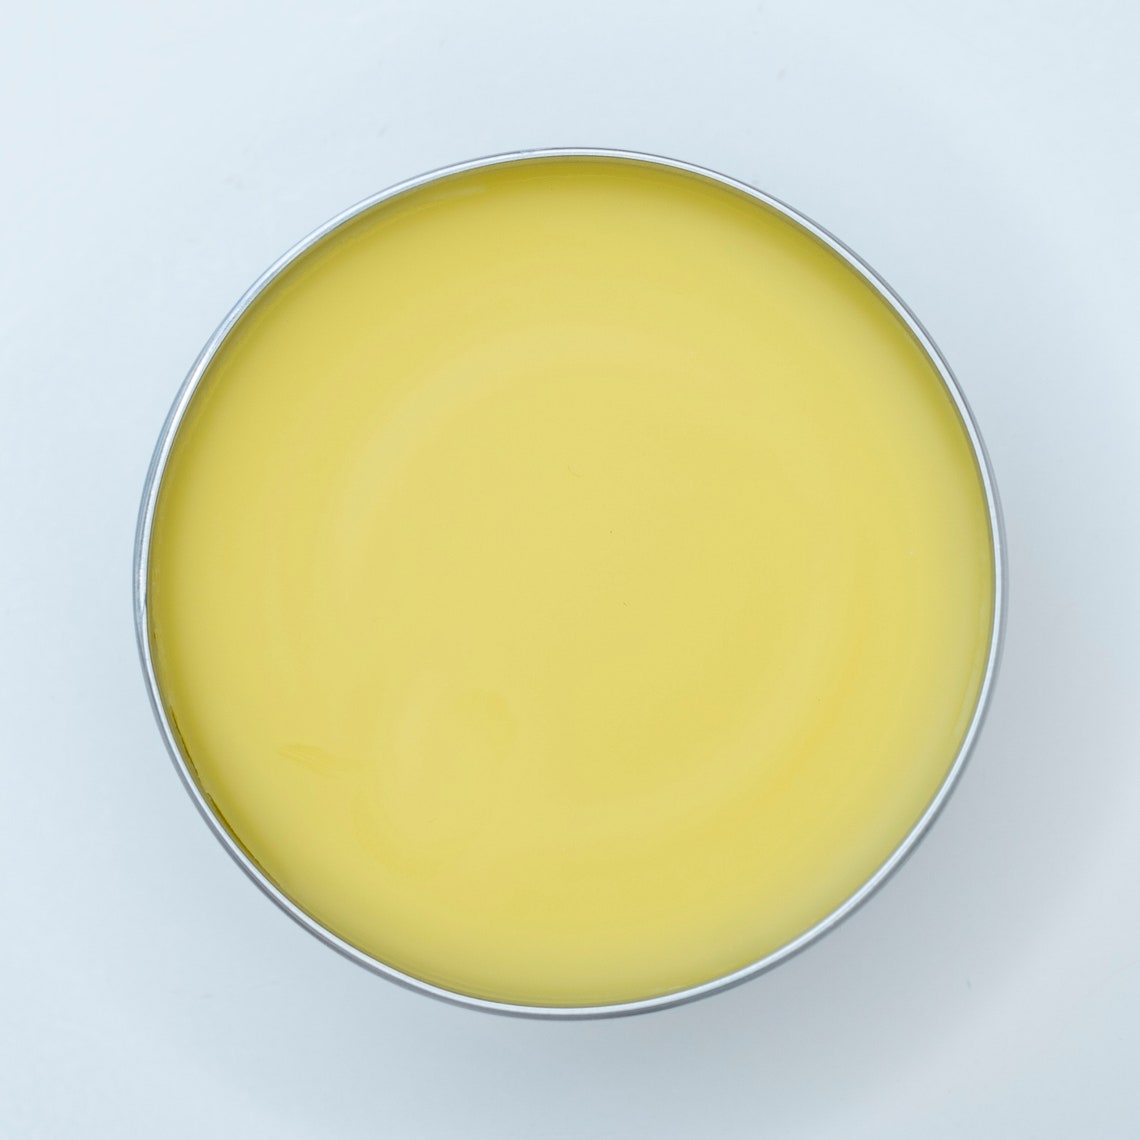  Interior image of a tin of Pet Salve - All-Purpose healing salve for cats & dogs. 100% organic, lickable, pet-safe ingredients. The salve is a cream color from the beeswax and calendula oil.